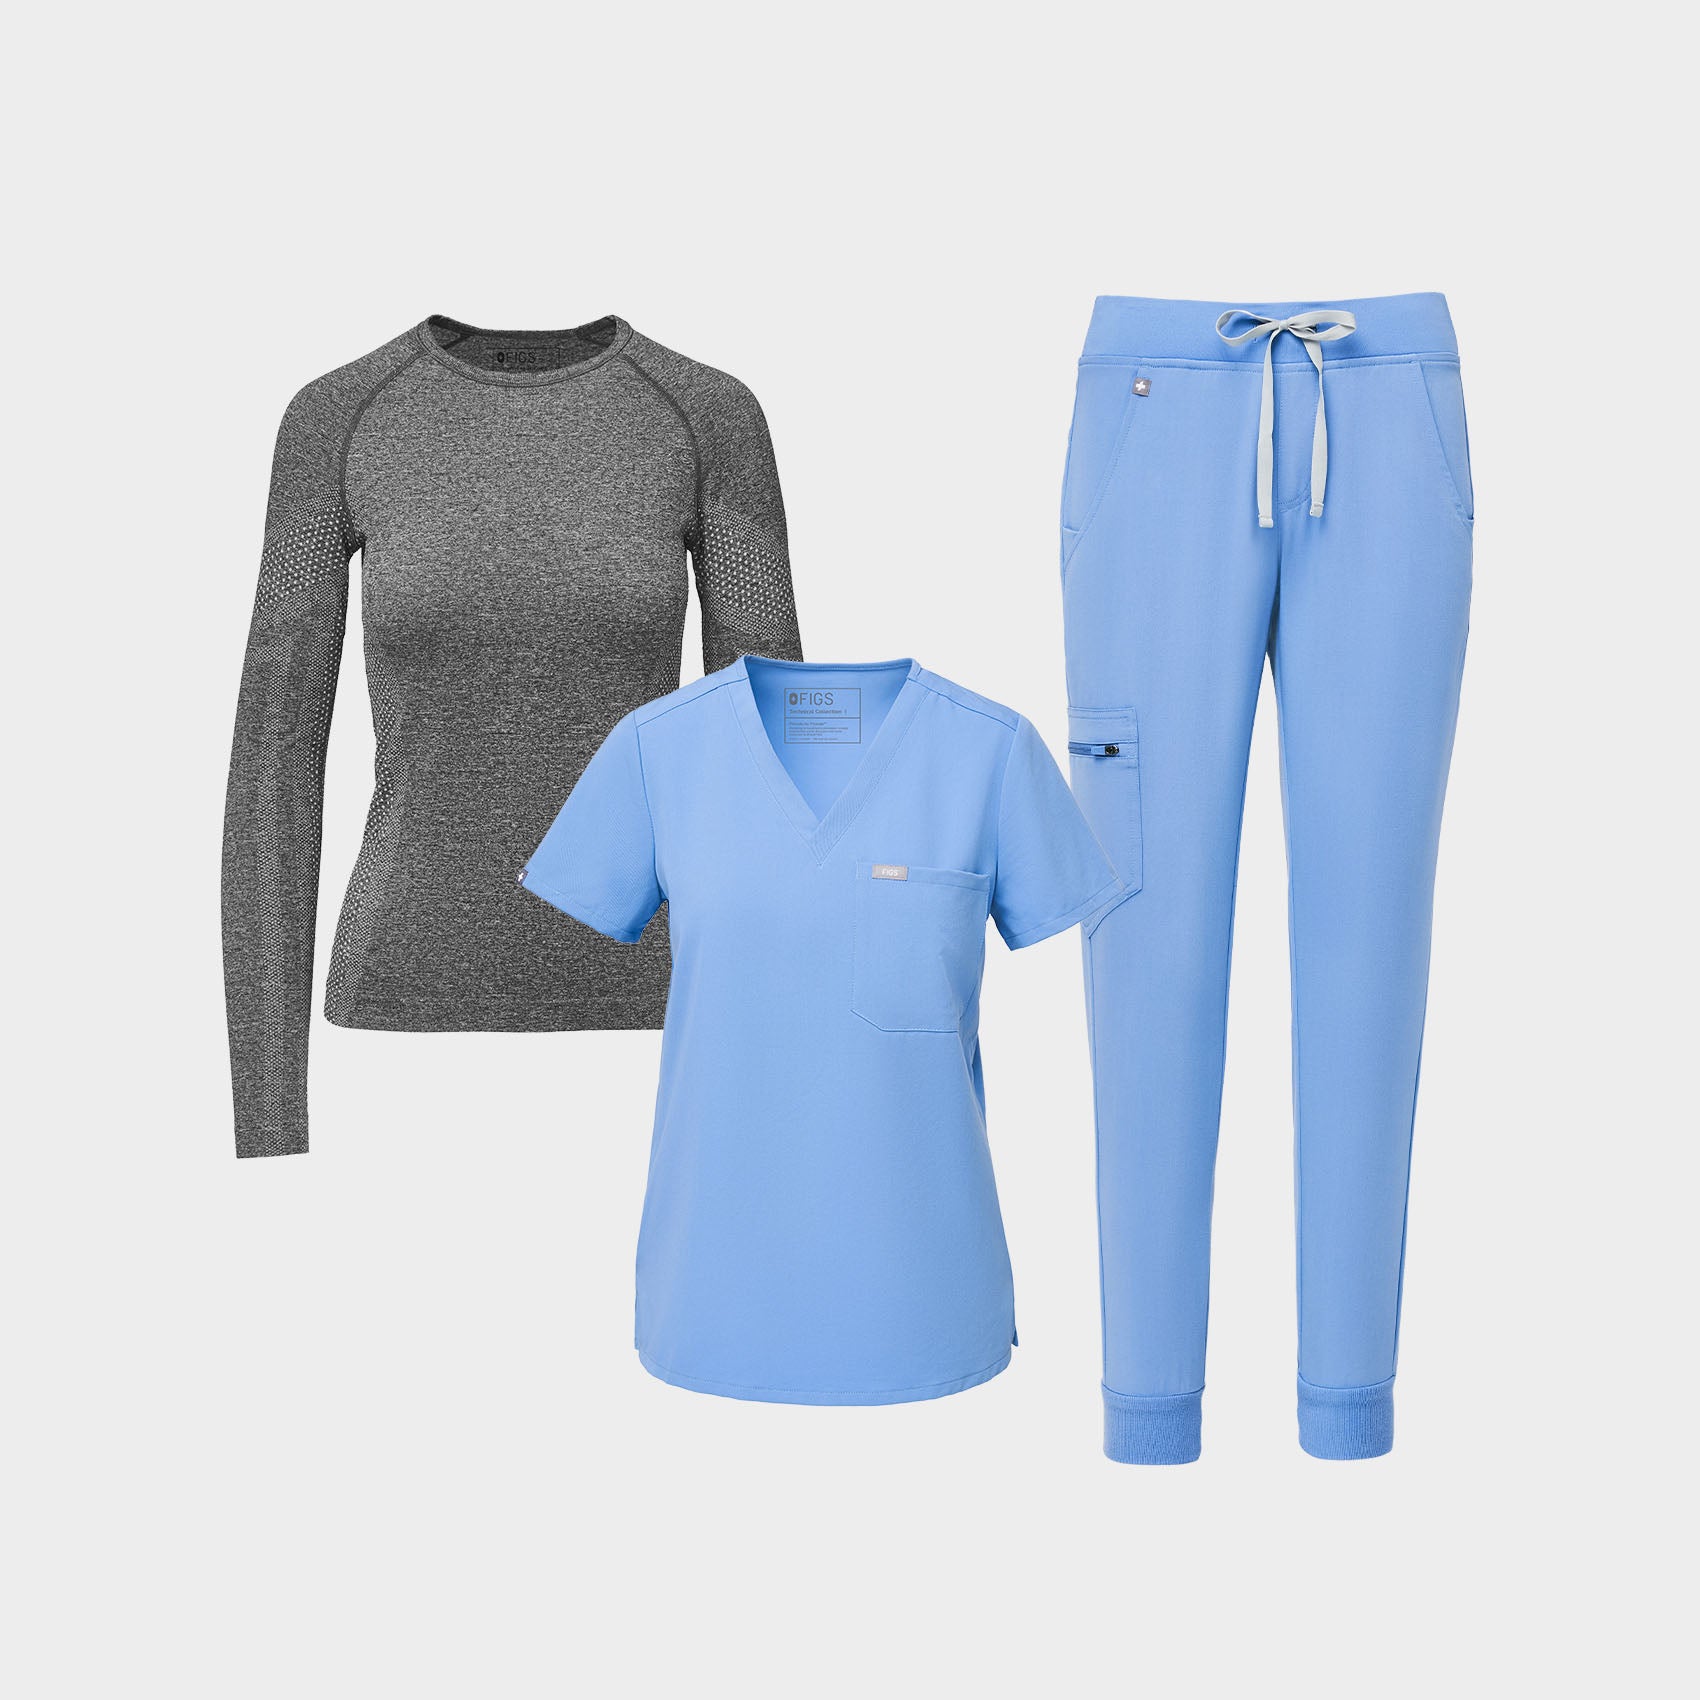 Women's On-Shift Layering Essentials Kit · FIGS